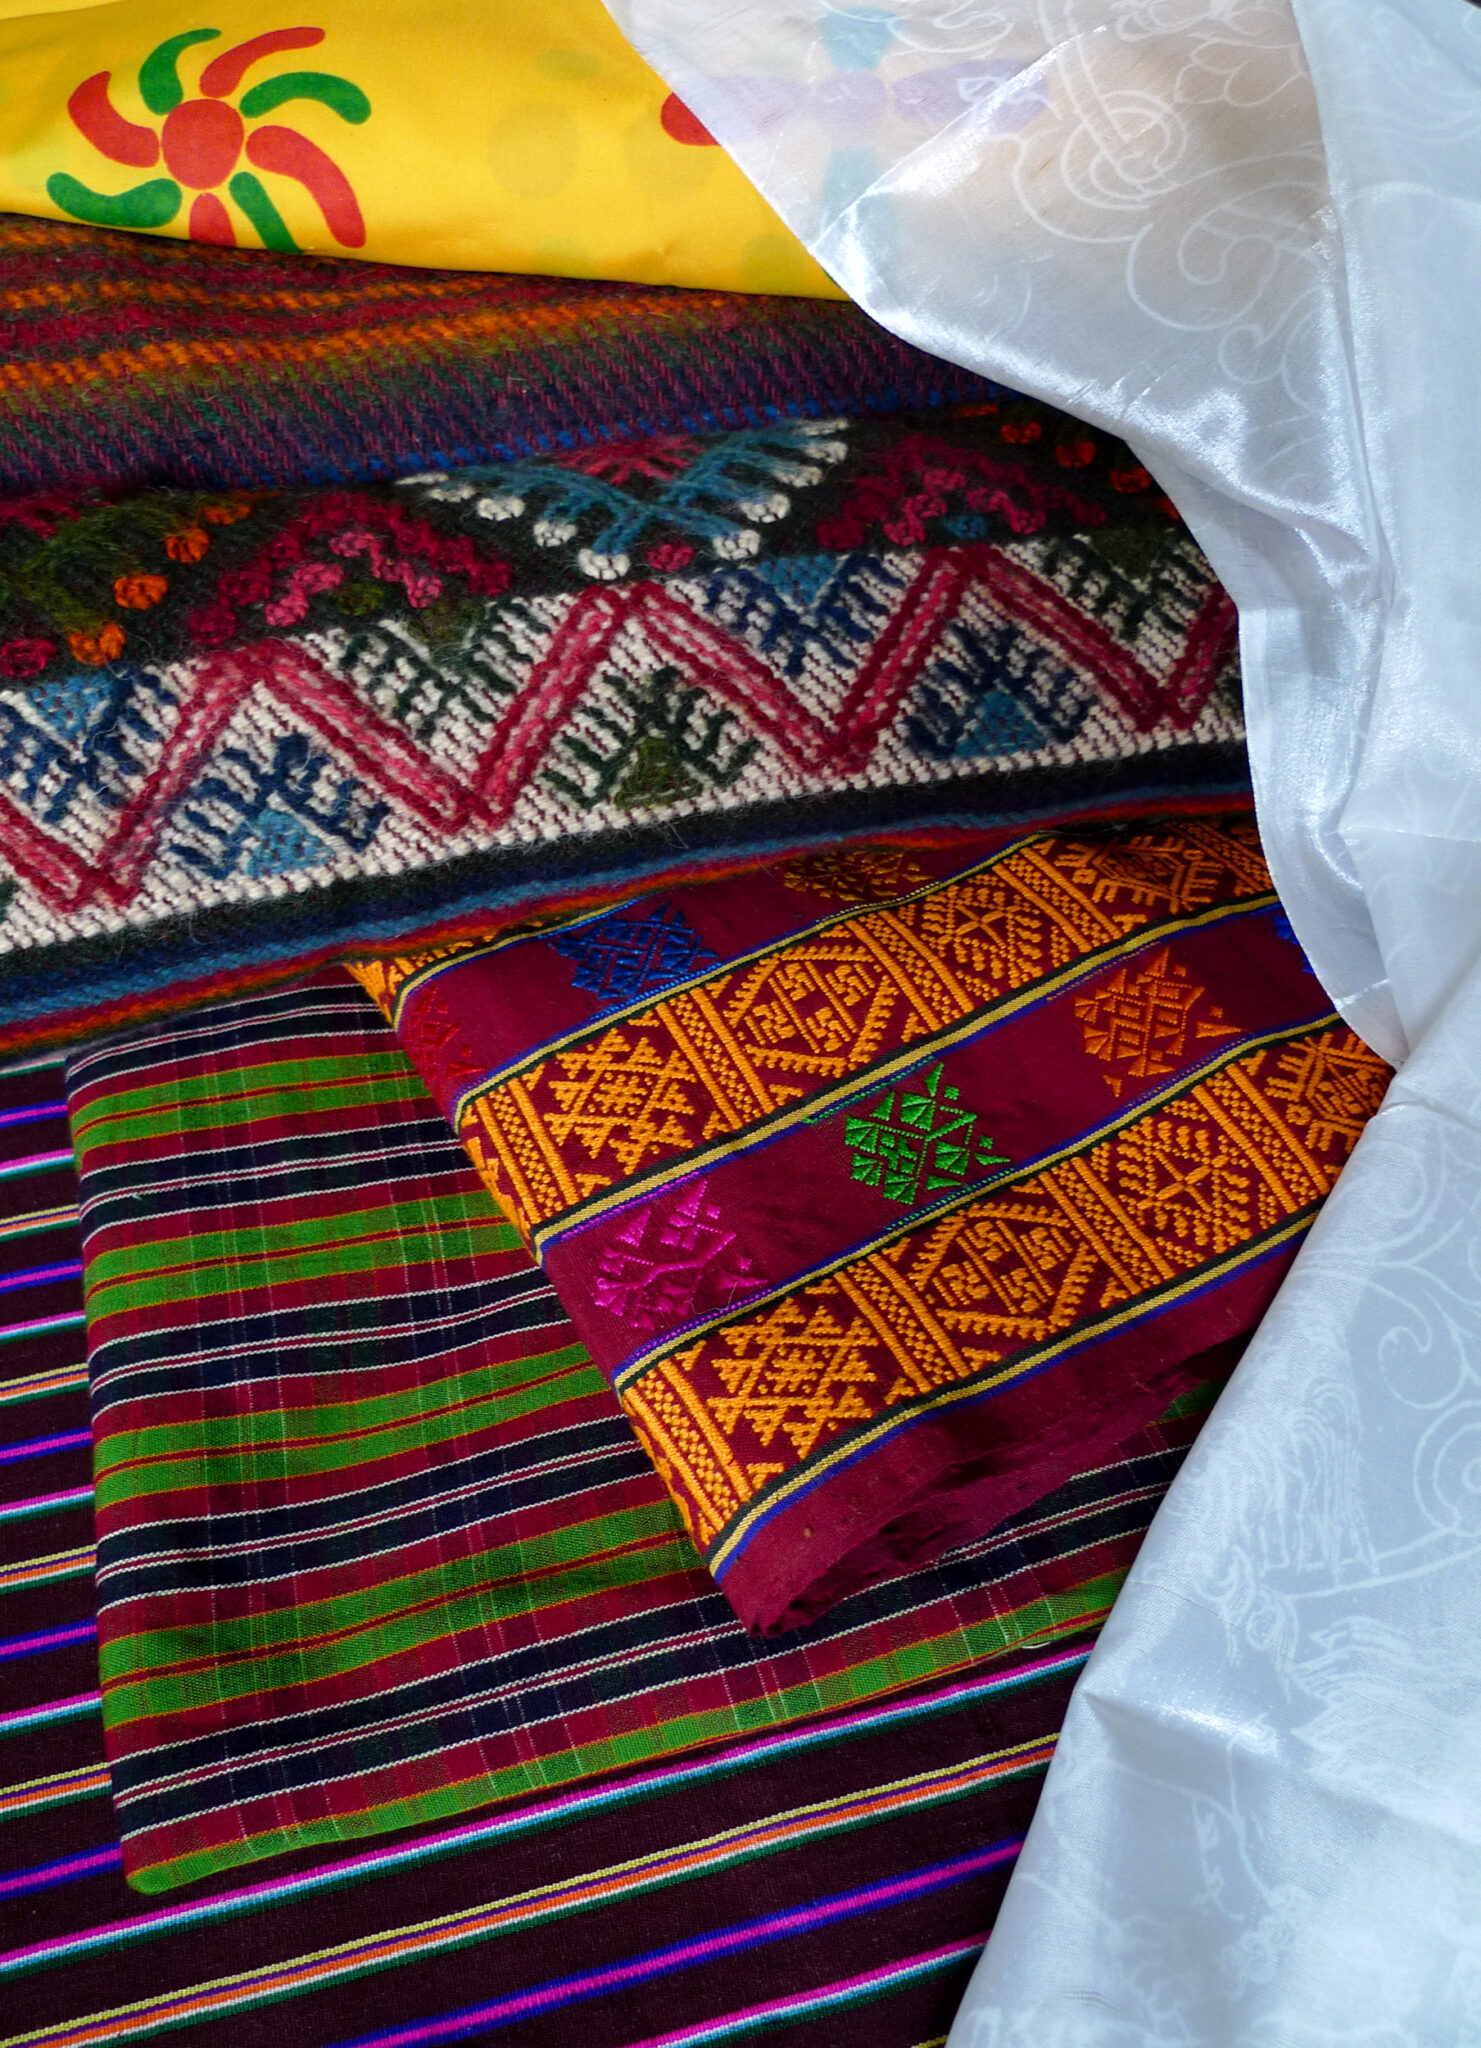 Five different types of textiles in multitude of colors displayed atop one another, all wrapped in white shawl